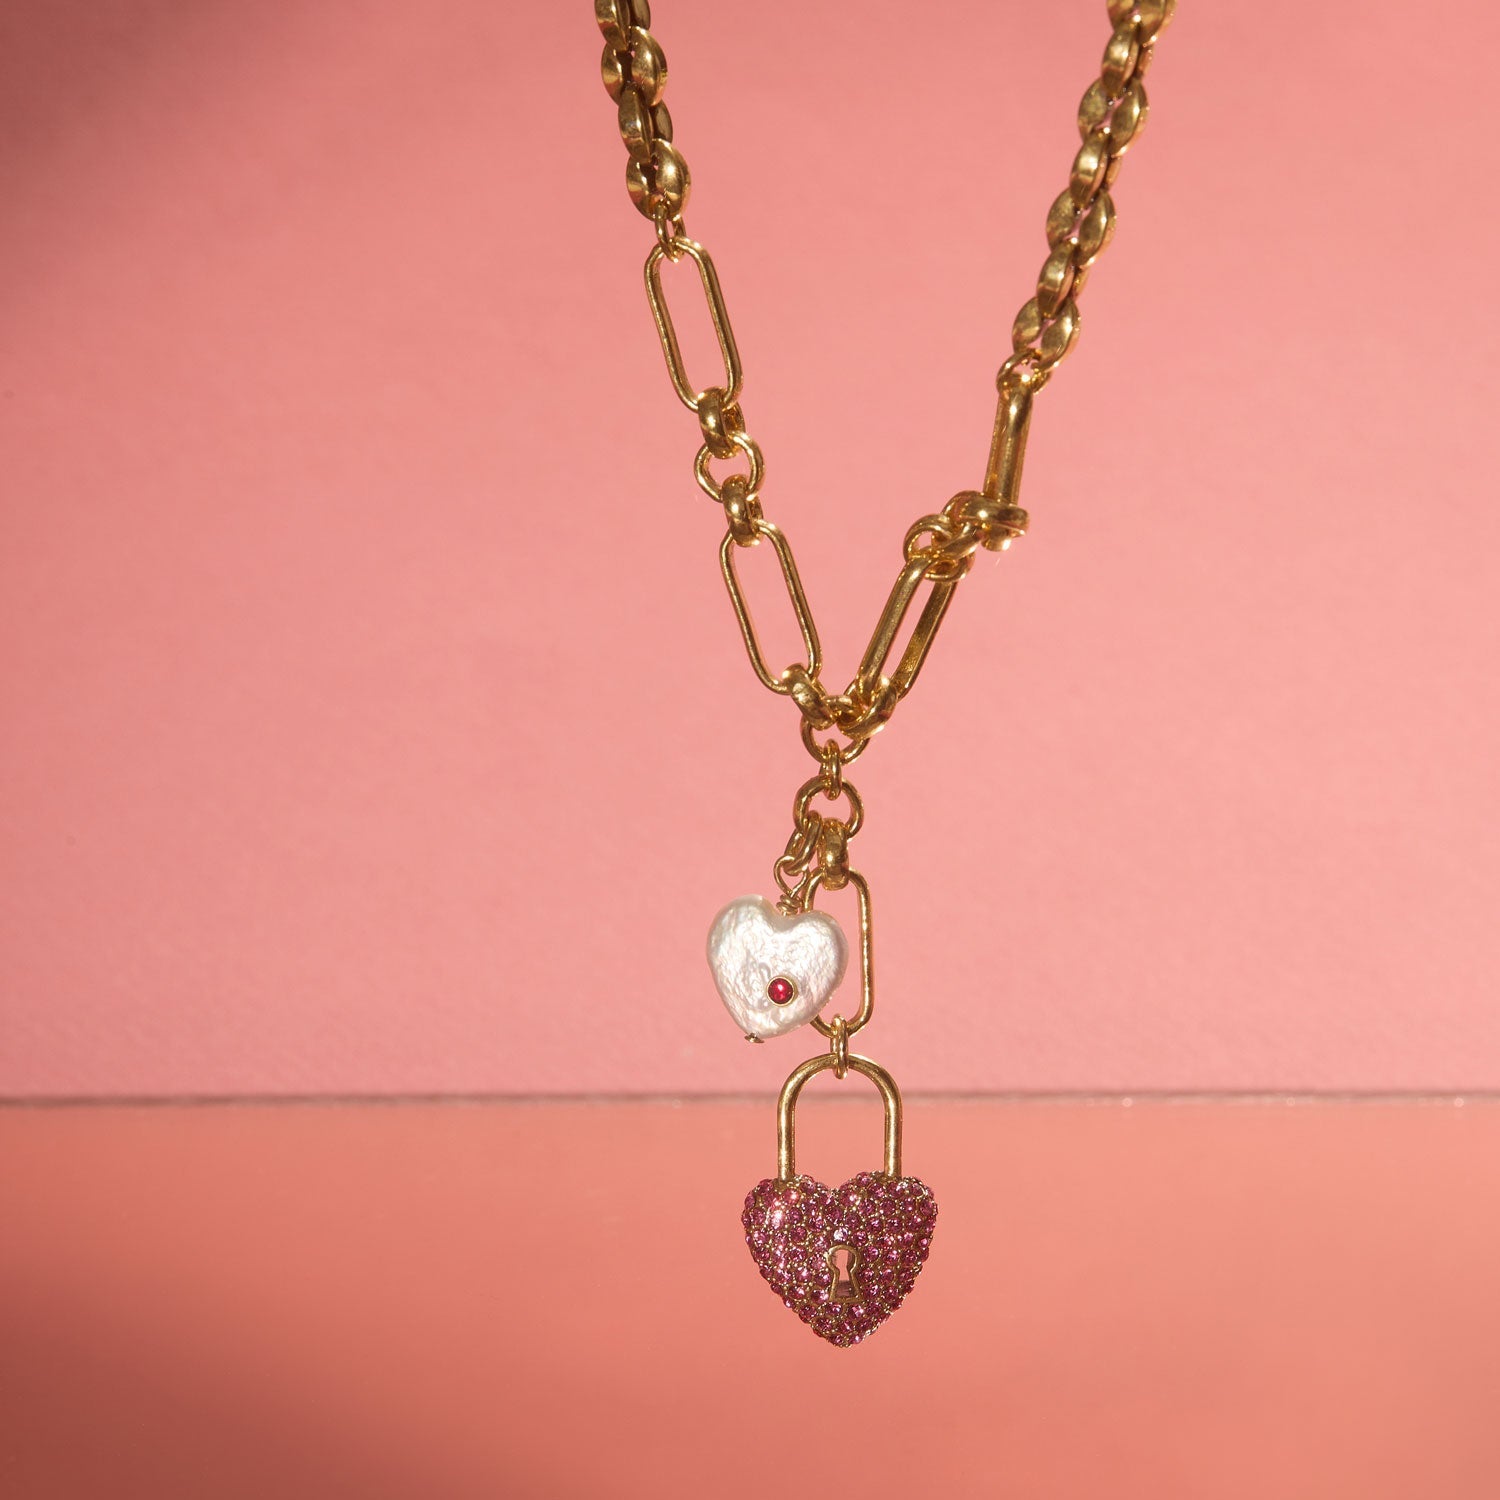 Love Story Charm Necklace by Mignonne Gavigan